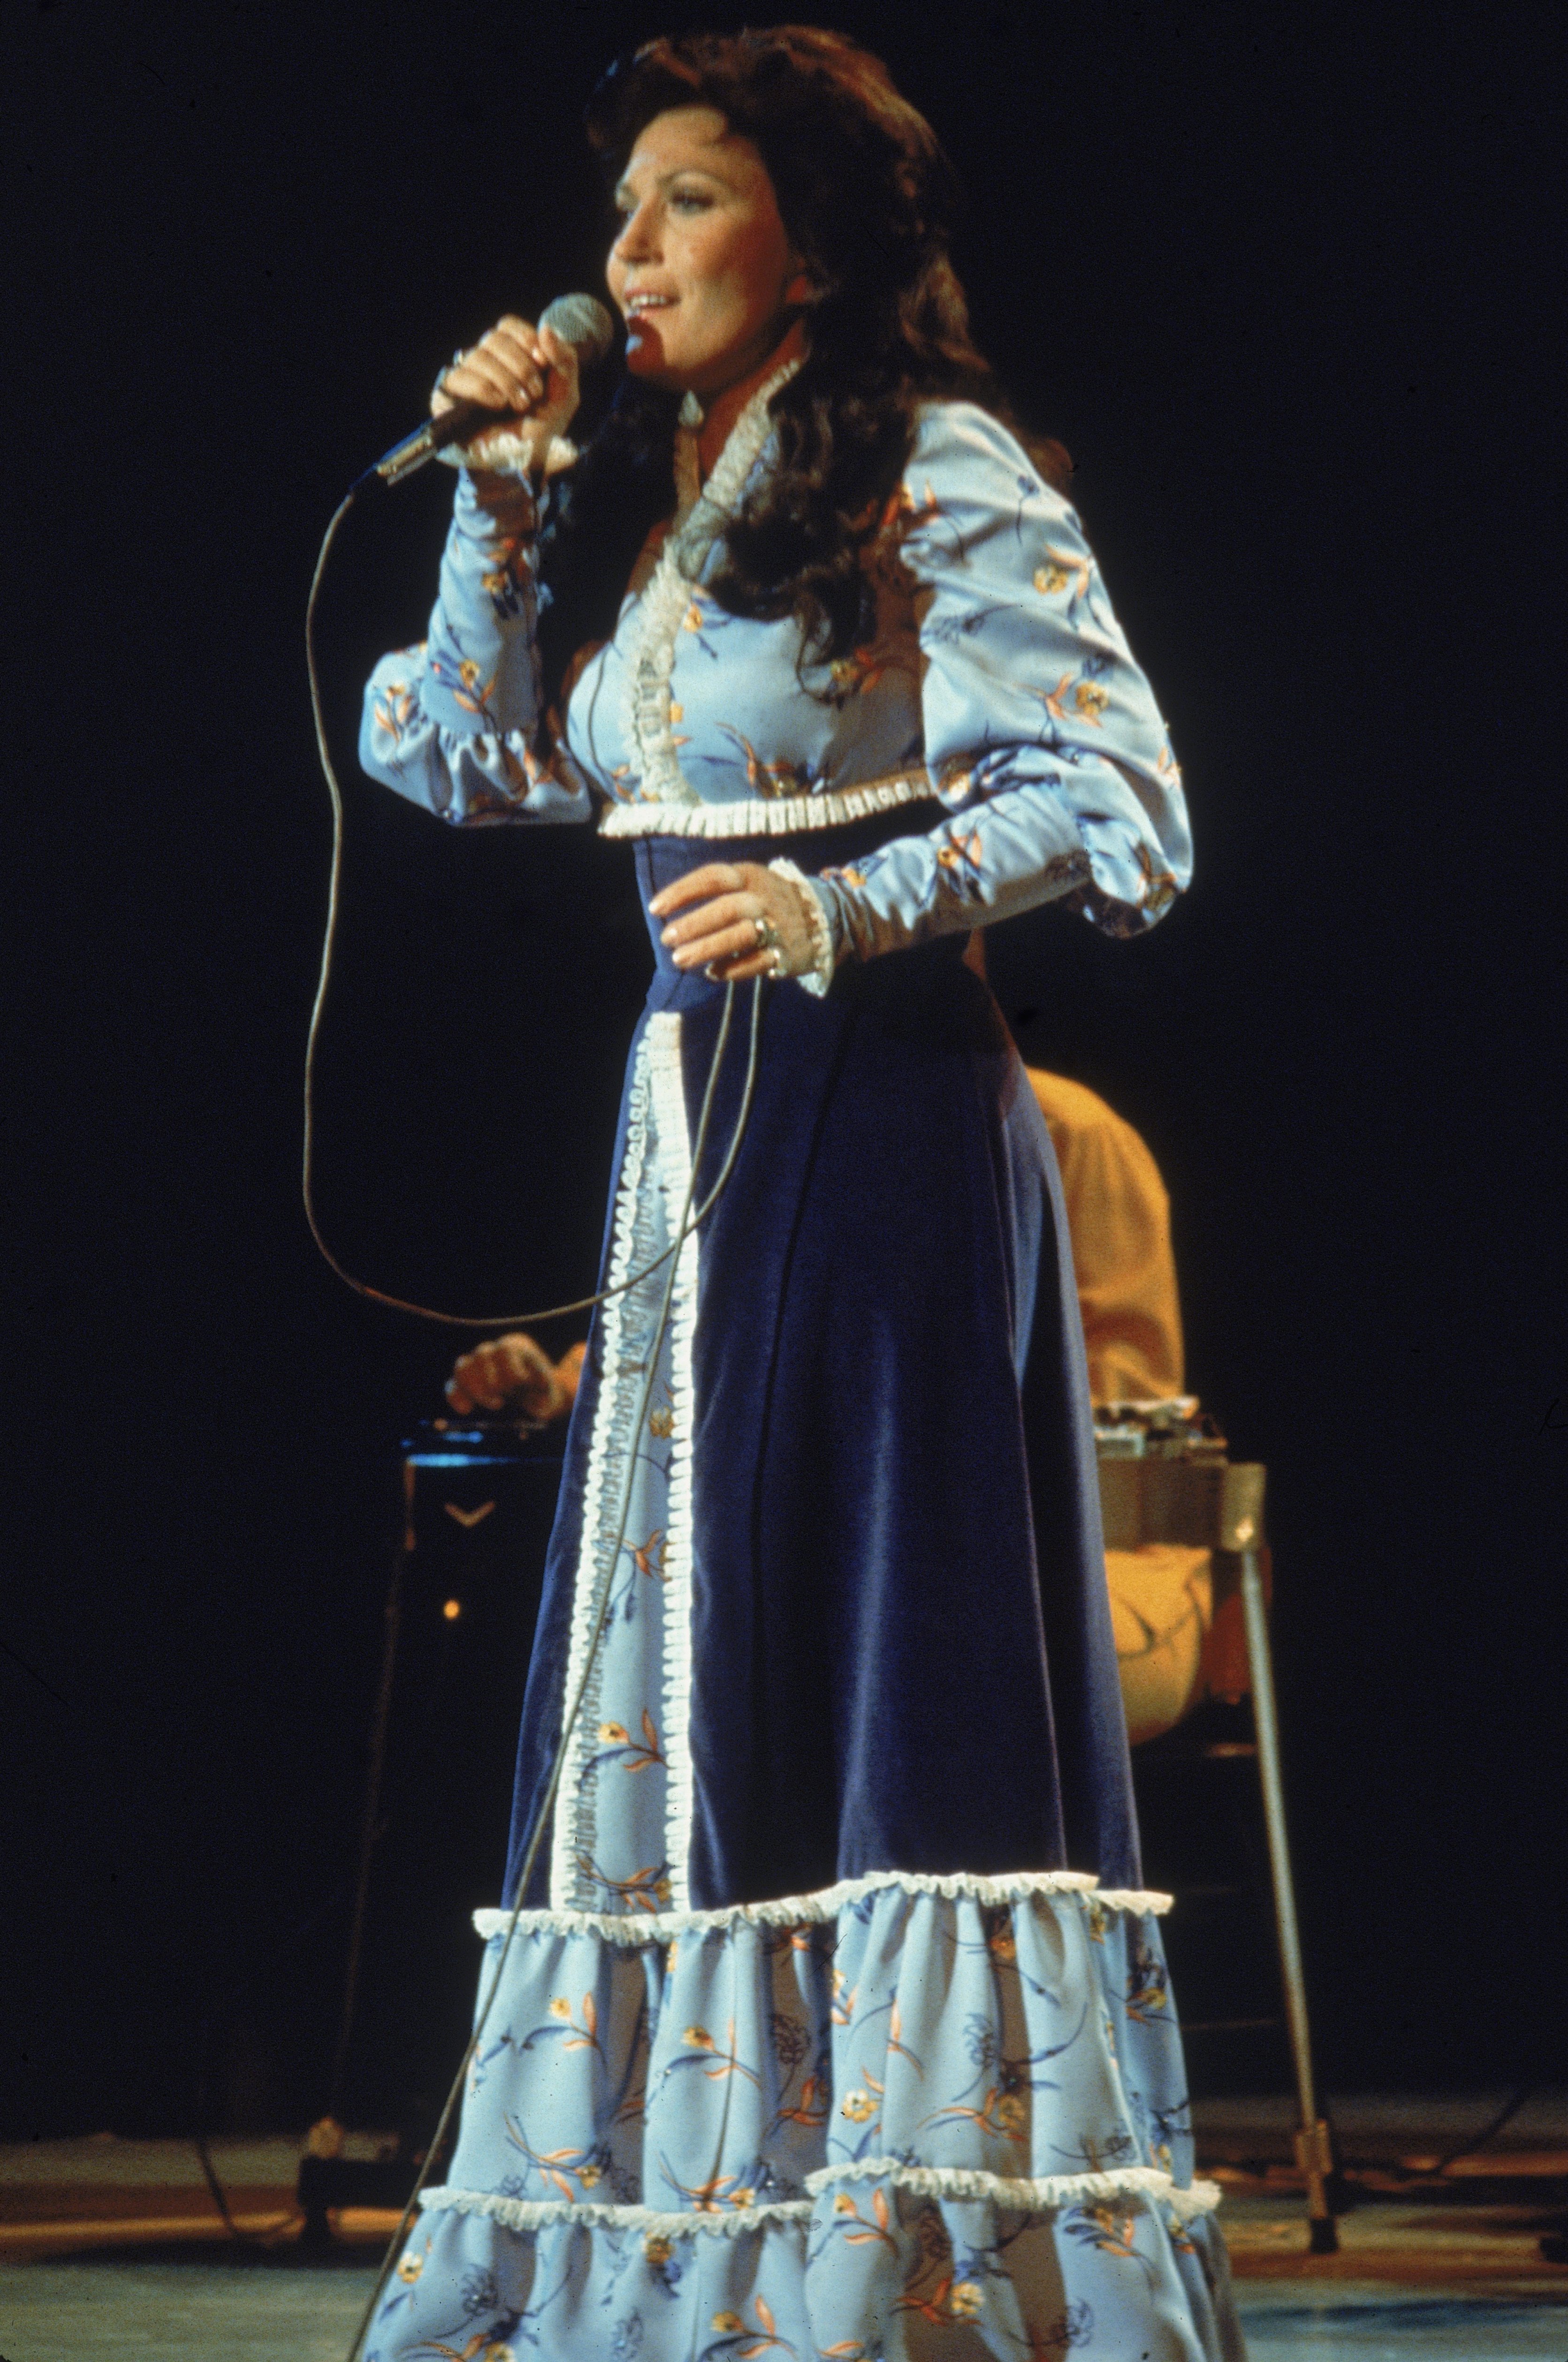 Loretta Lynn performs on stage, wearing a long dress, circa 1980. | Source: Getty Images.